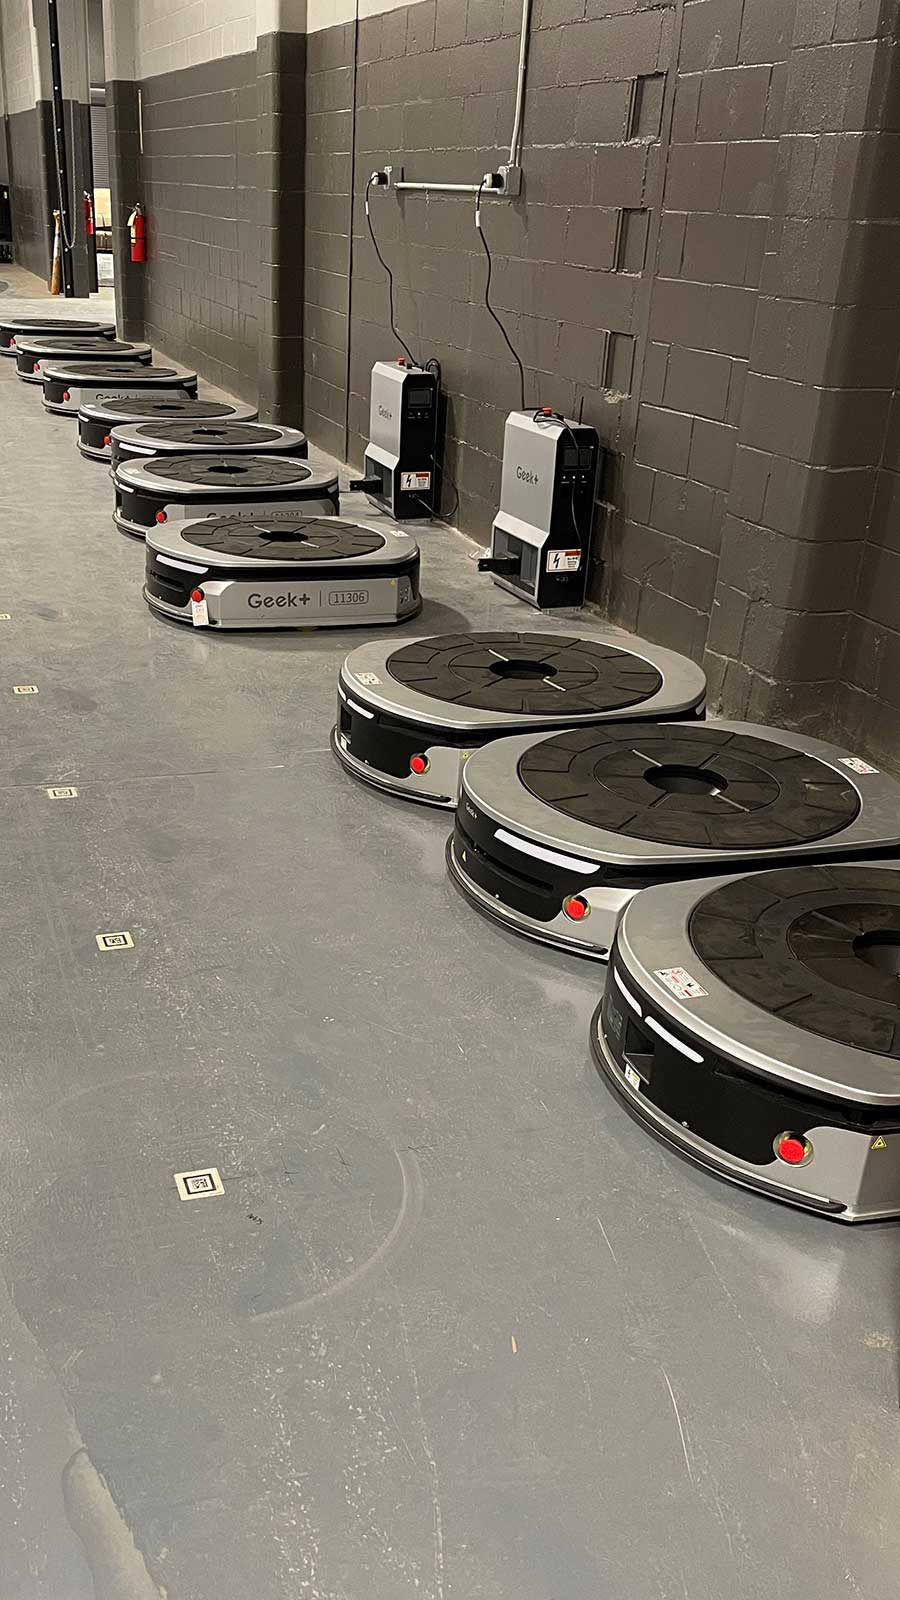 Outdoor Network Case Study Geek+ Integrator. Automated Guided Vehicles (AGVs) lined up against a warehouse wall, showing two charging stations.